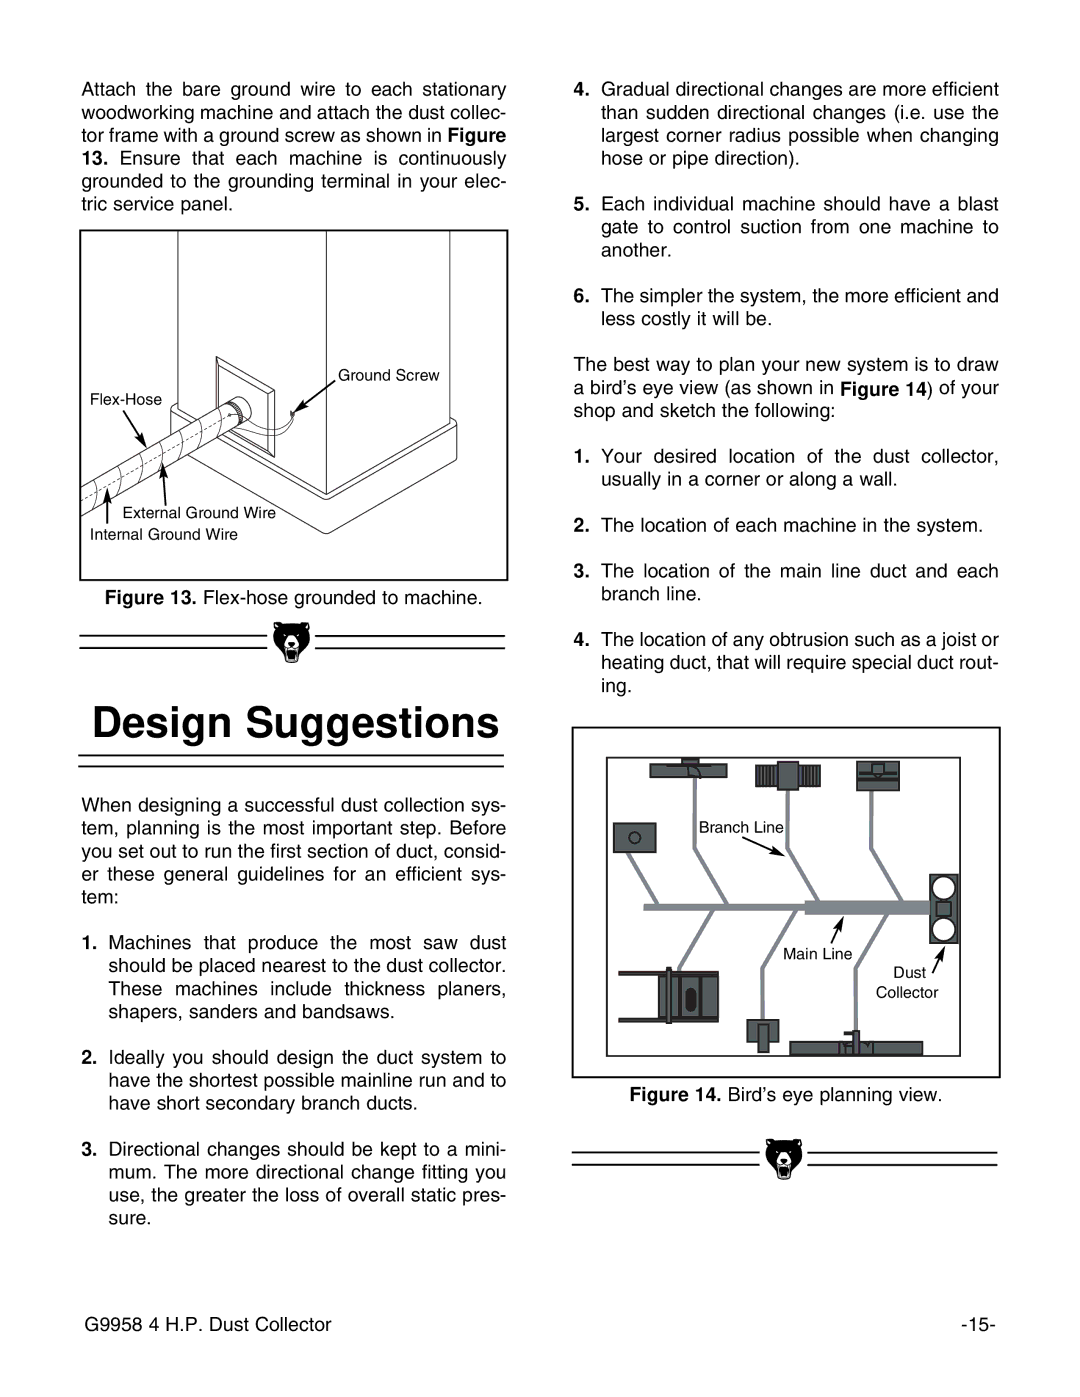 Grizzly G9958 instruction manual Design Suggestions, Flex-hose grounded to machine 